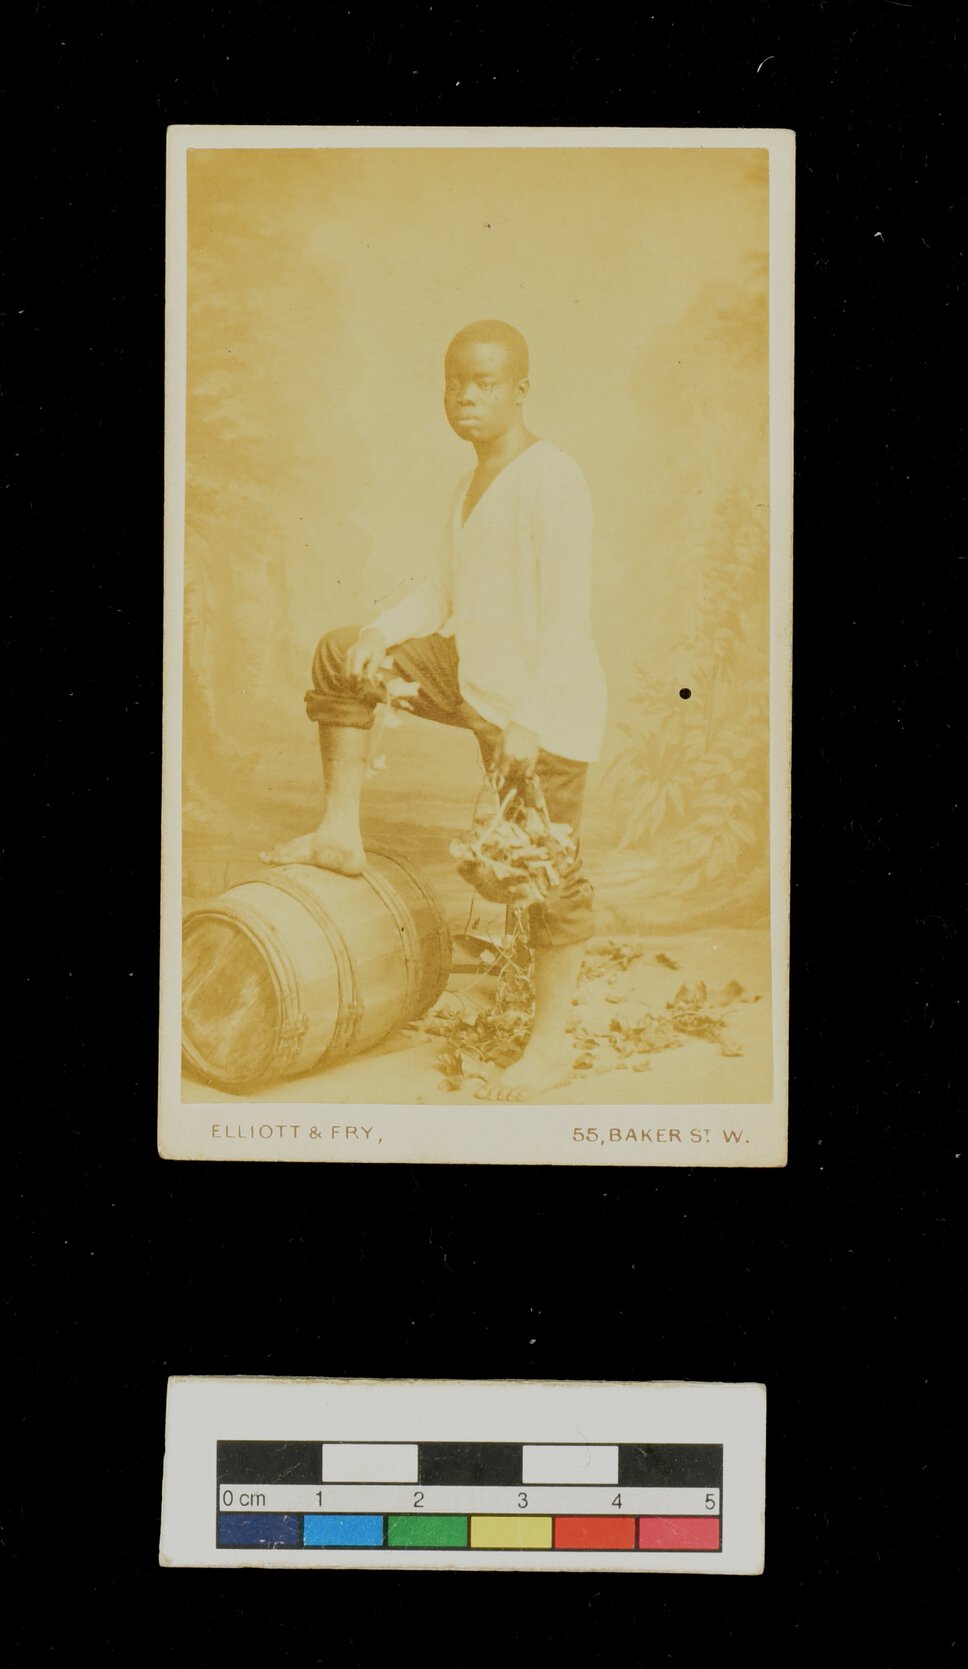 Jacob Wainwright, standing in quarter profile with one foot on barrel, holding basket with one hand. 